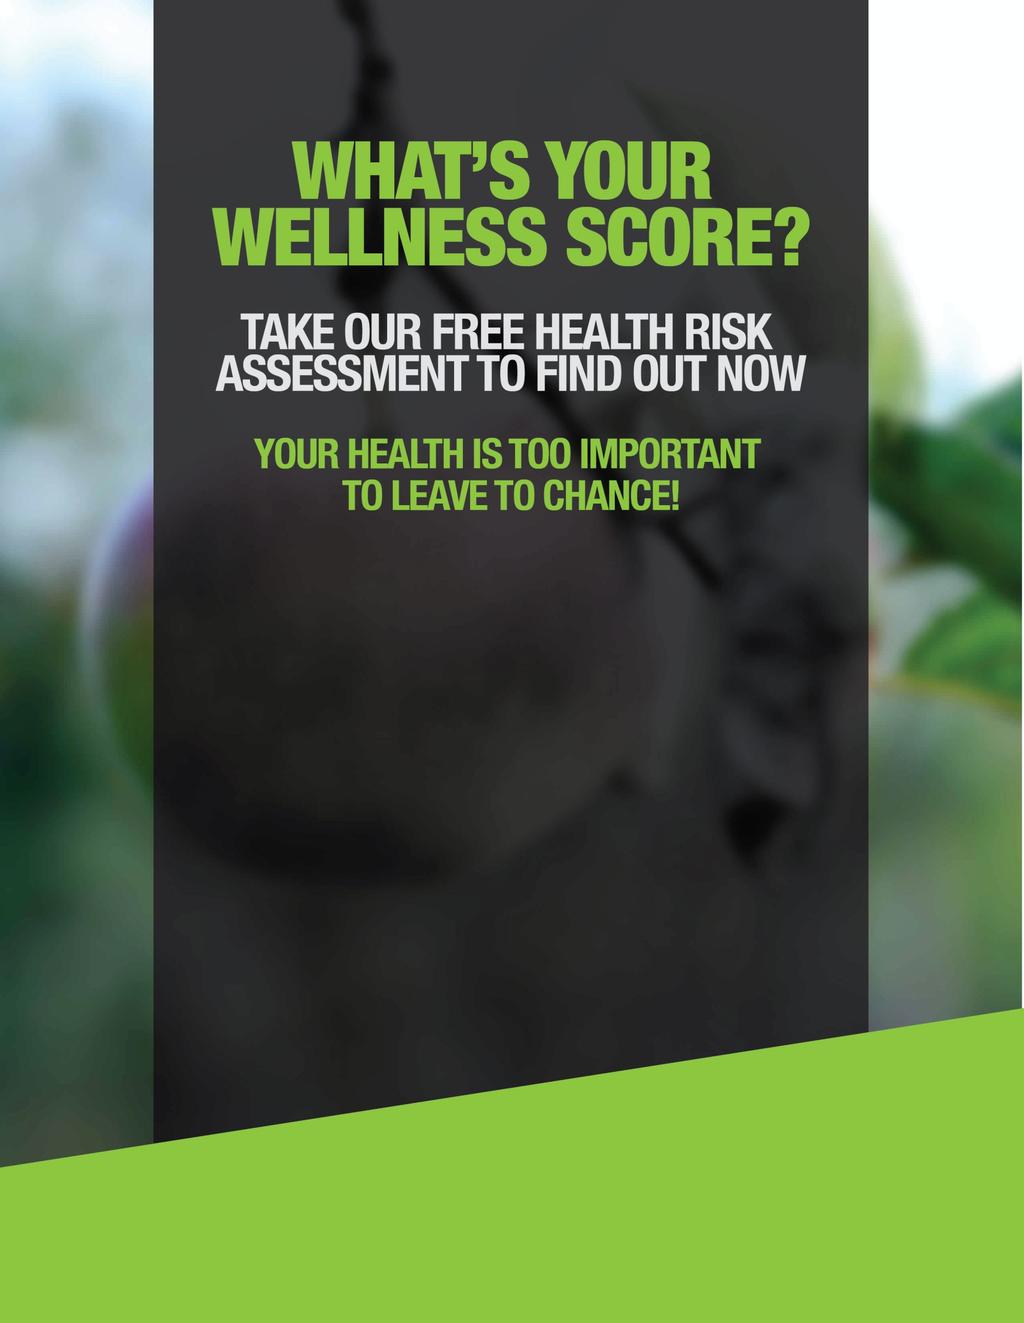 VISIT US ON FACEBOOK OR GO TO OUR WEBSITE NOW TO TAKE OUR FREE HEALTH RISK ASSESSMENT AND FIND OUT YOUR WELLNESS SCORE. www.